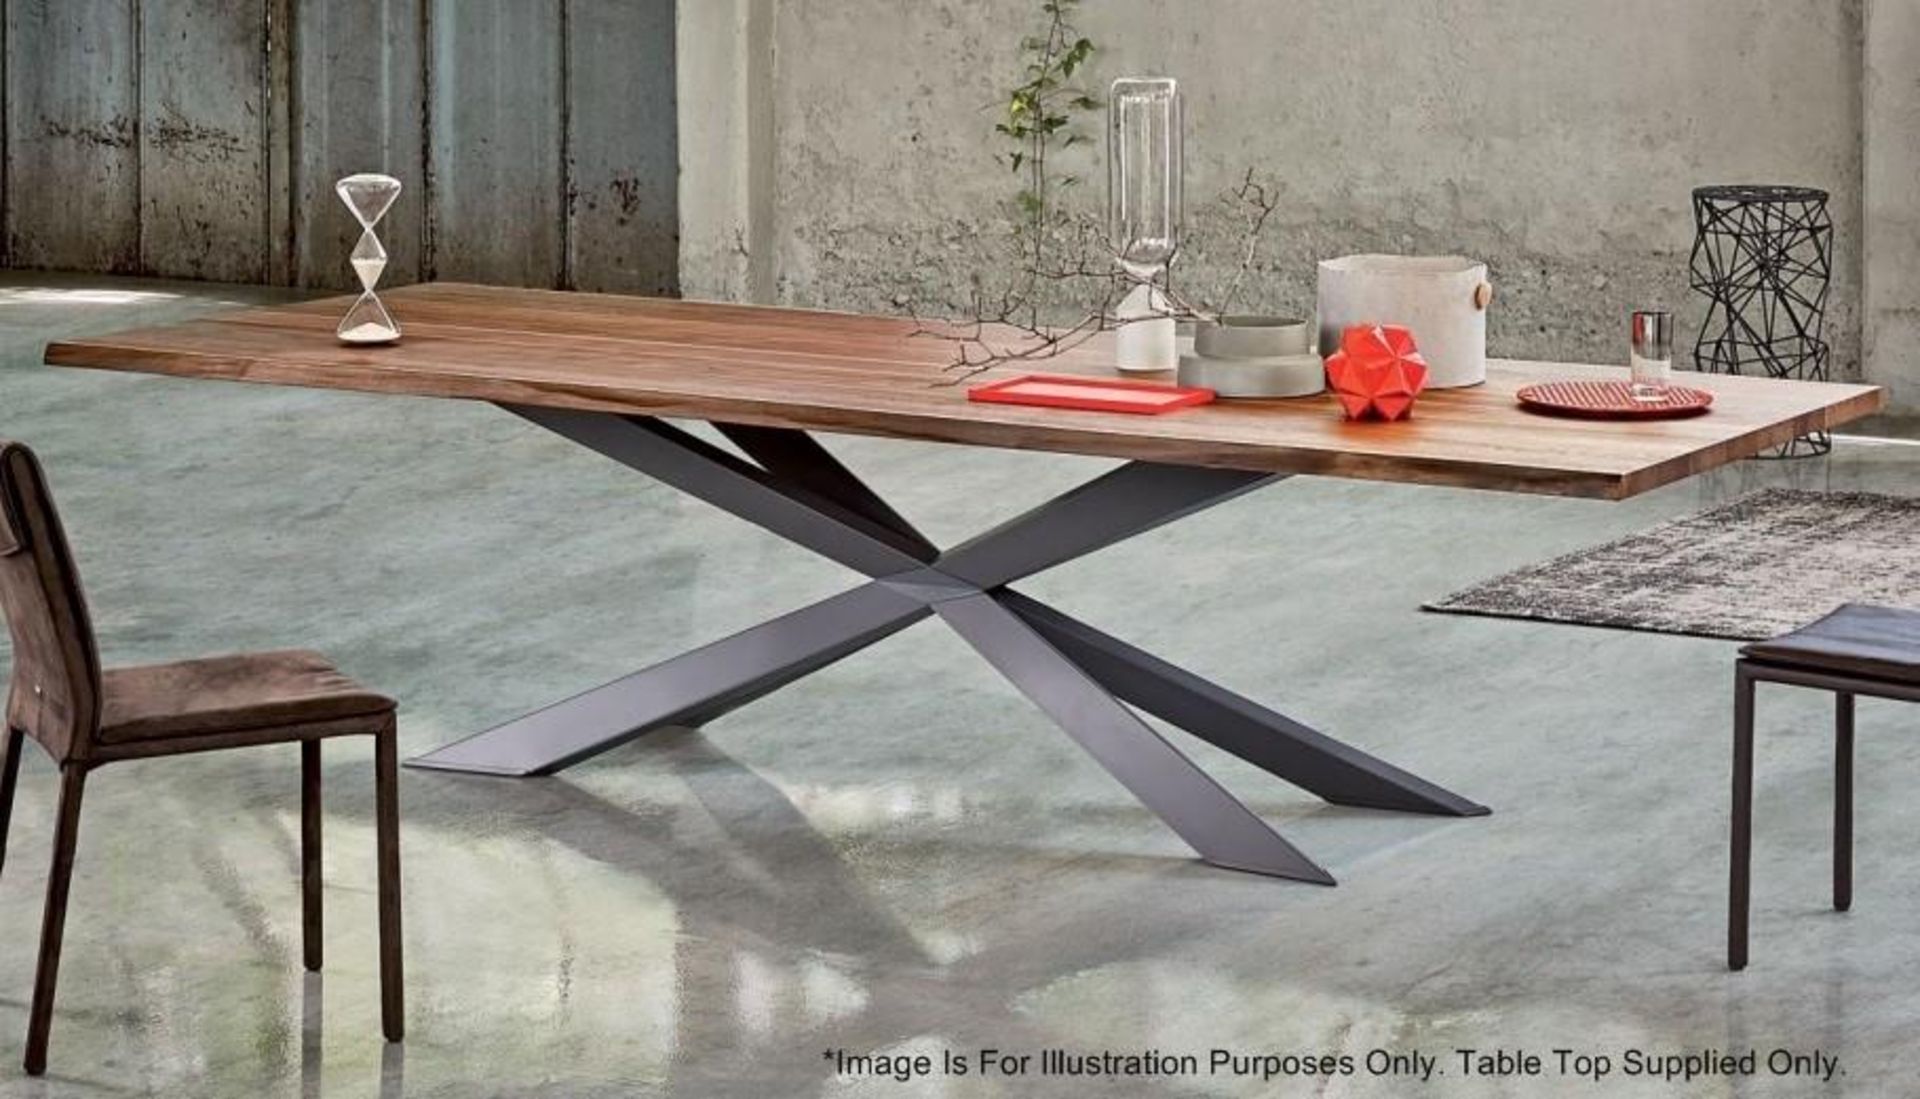 1 x CATTELAN "Spyder" Wooden 3-Metre Long Table Top Made From Natural Canaletto Walnut - Supplied In - Image 2 of 3